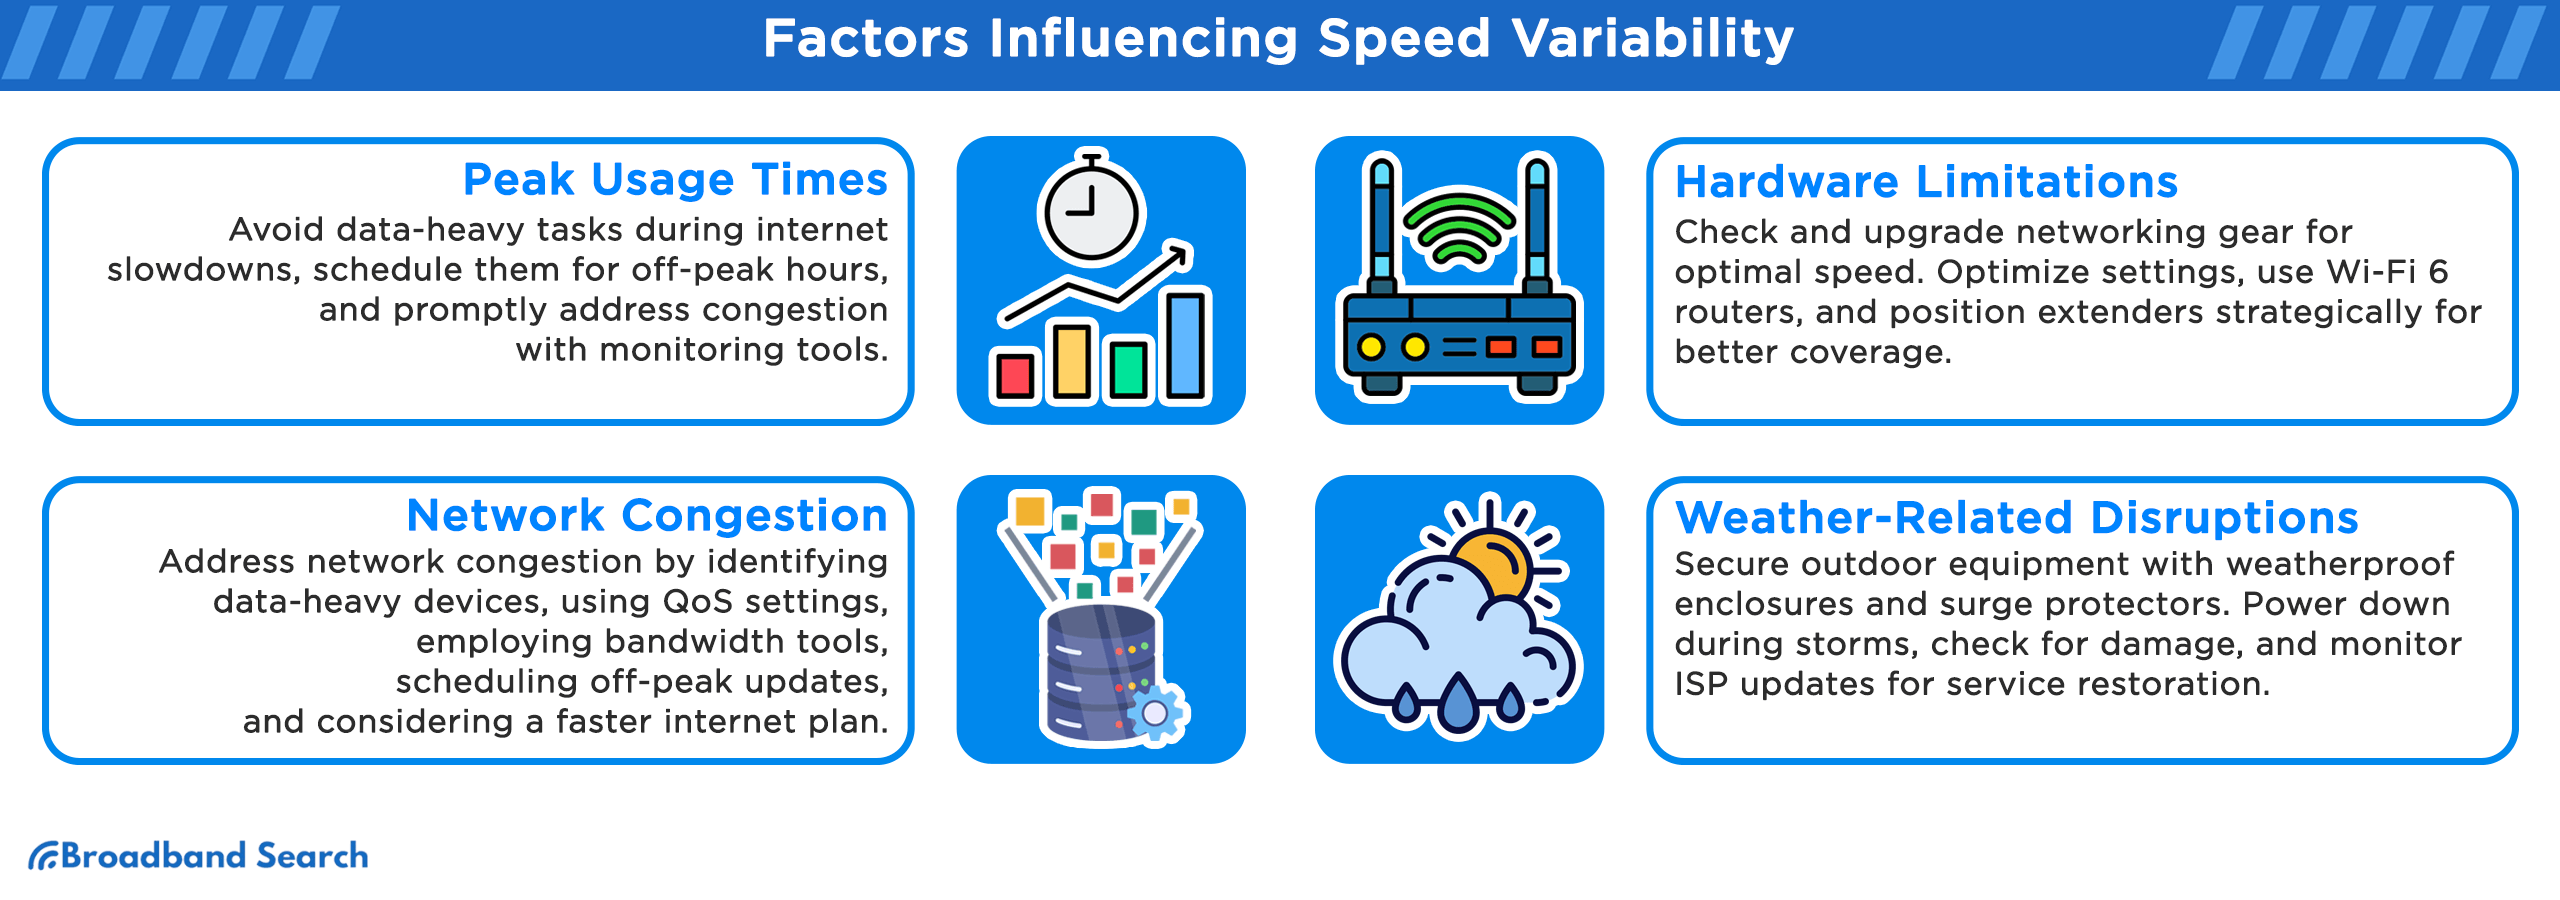 four factors influencing internet speed variability